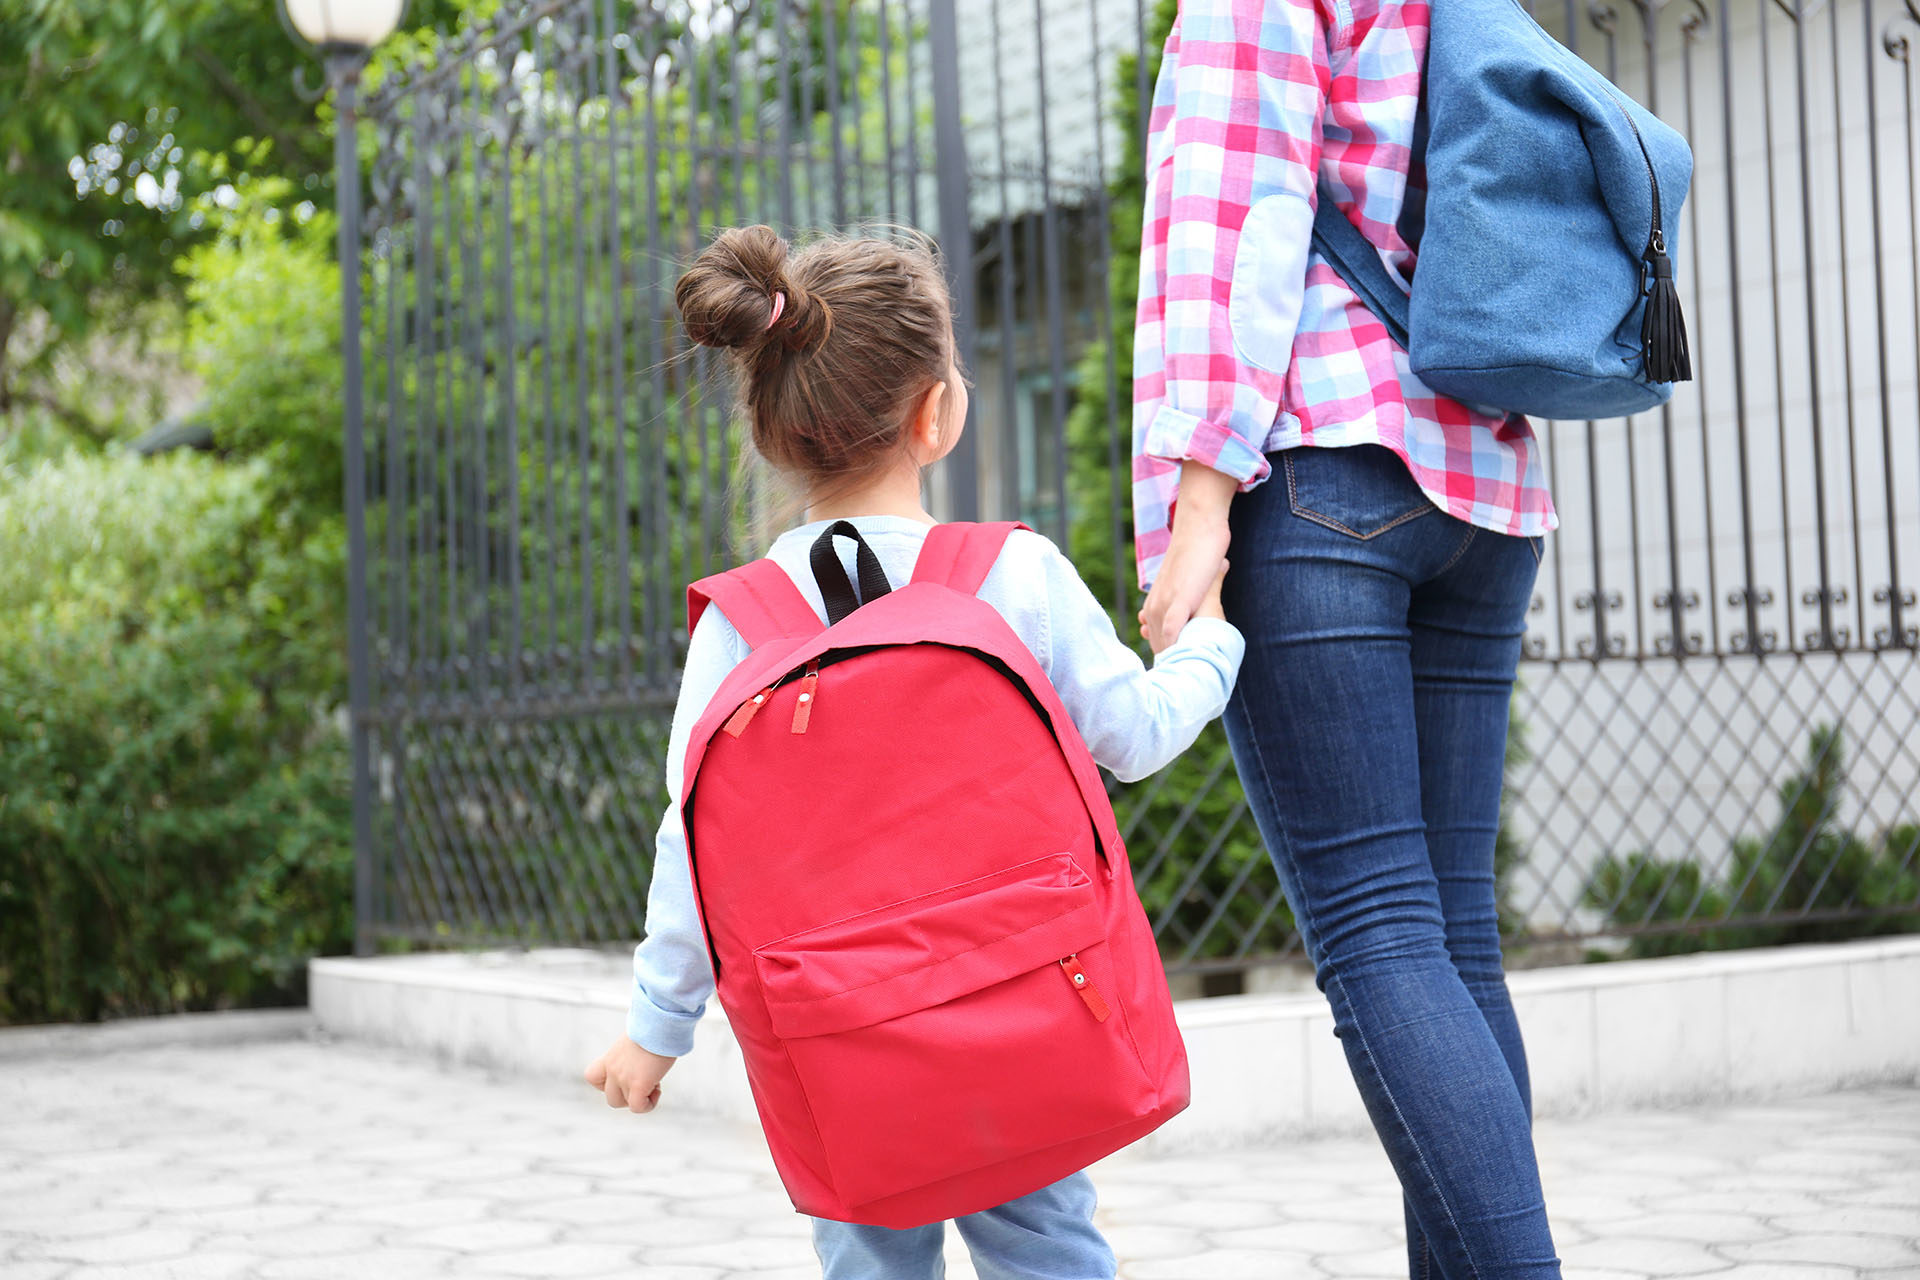 Is your Child Starting School in September?